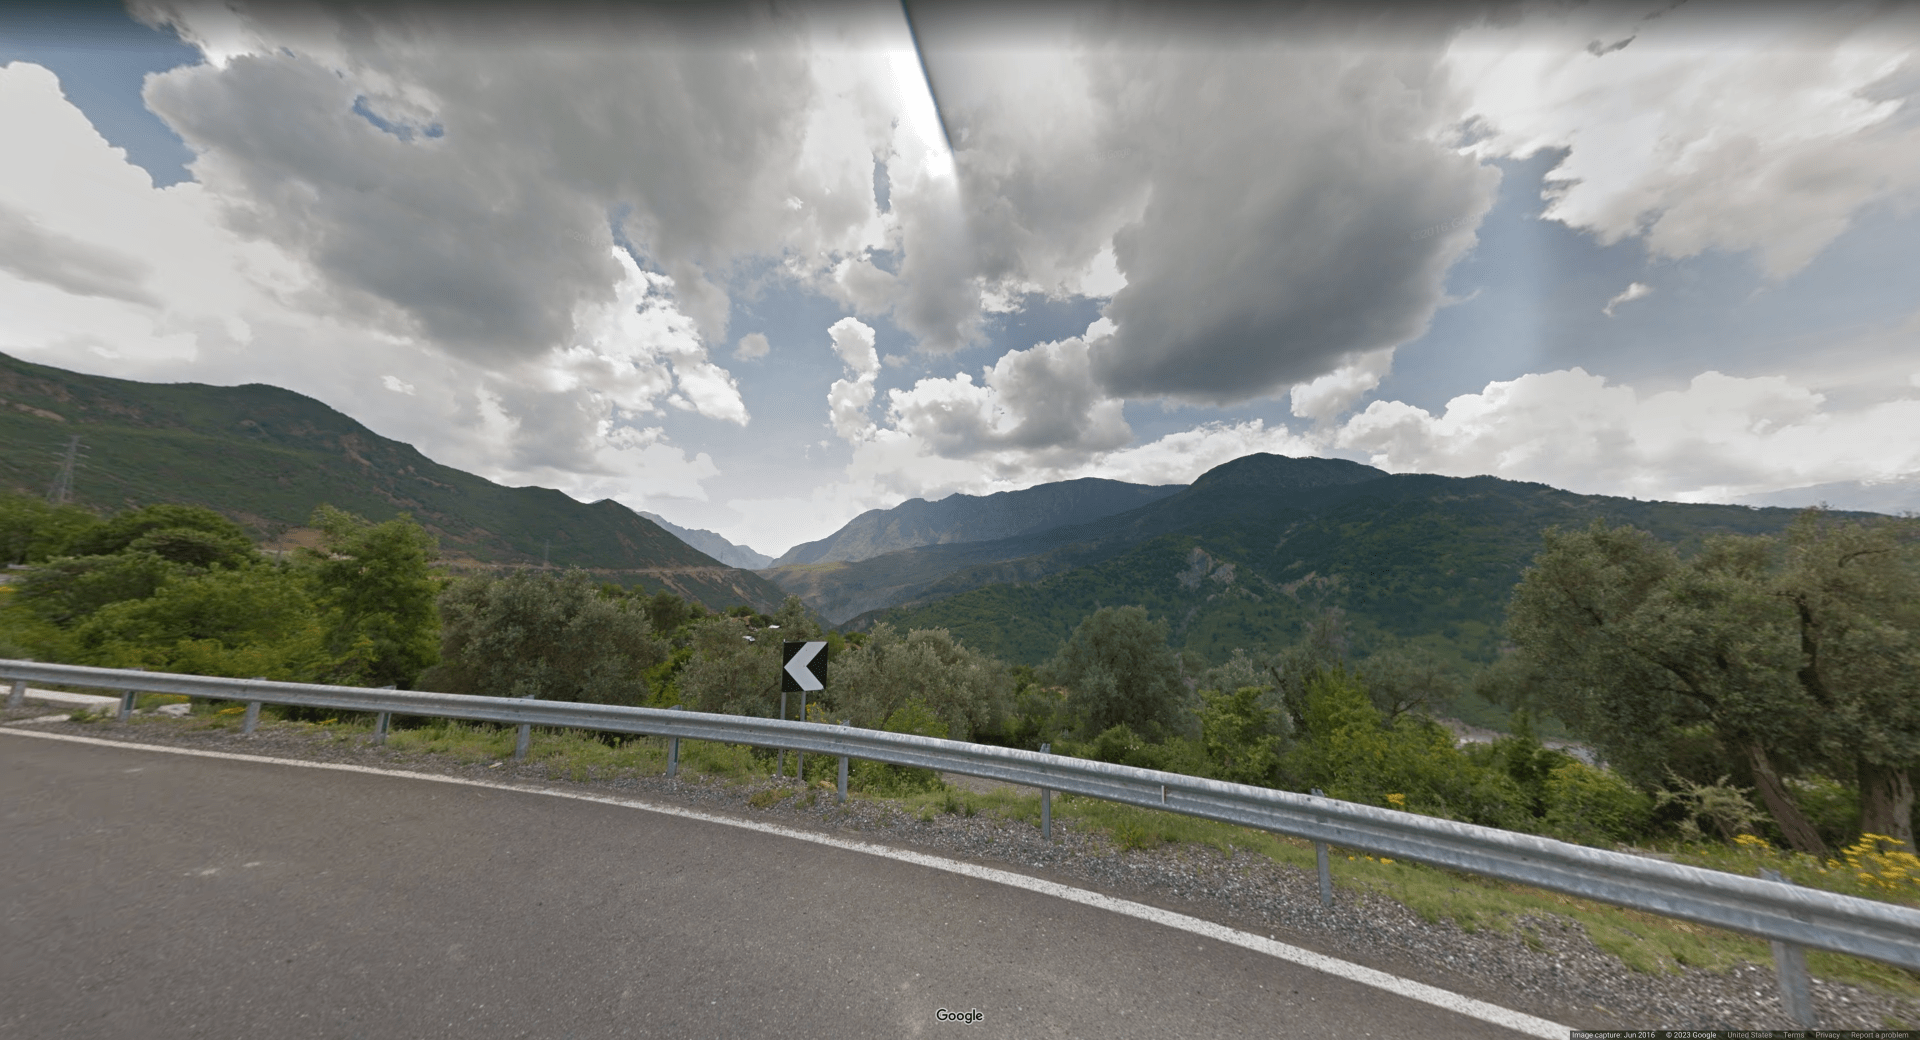 Picture of a beautiful valley area with hills and mountains, and a white on black turn chevron on the road